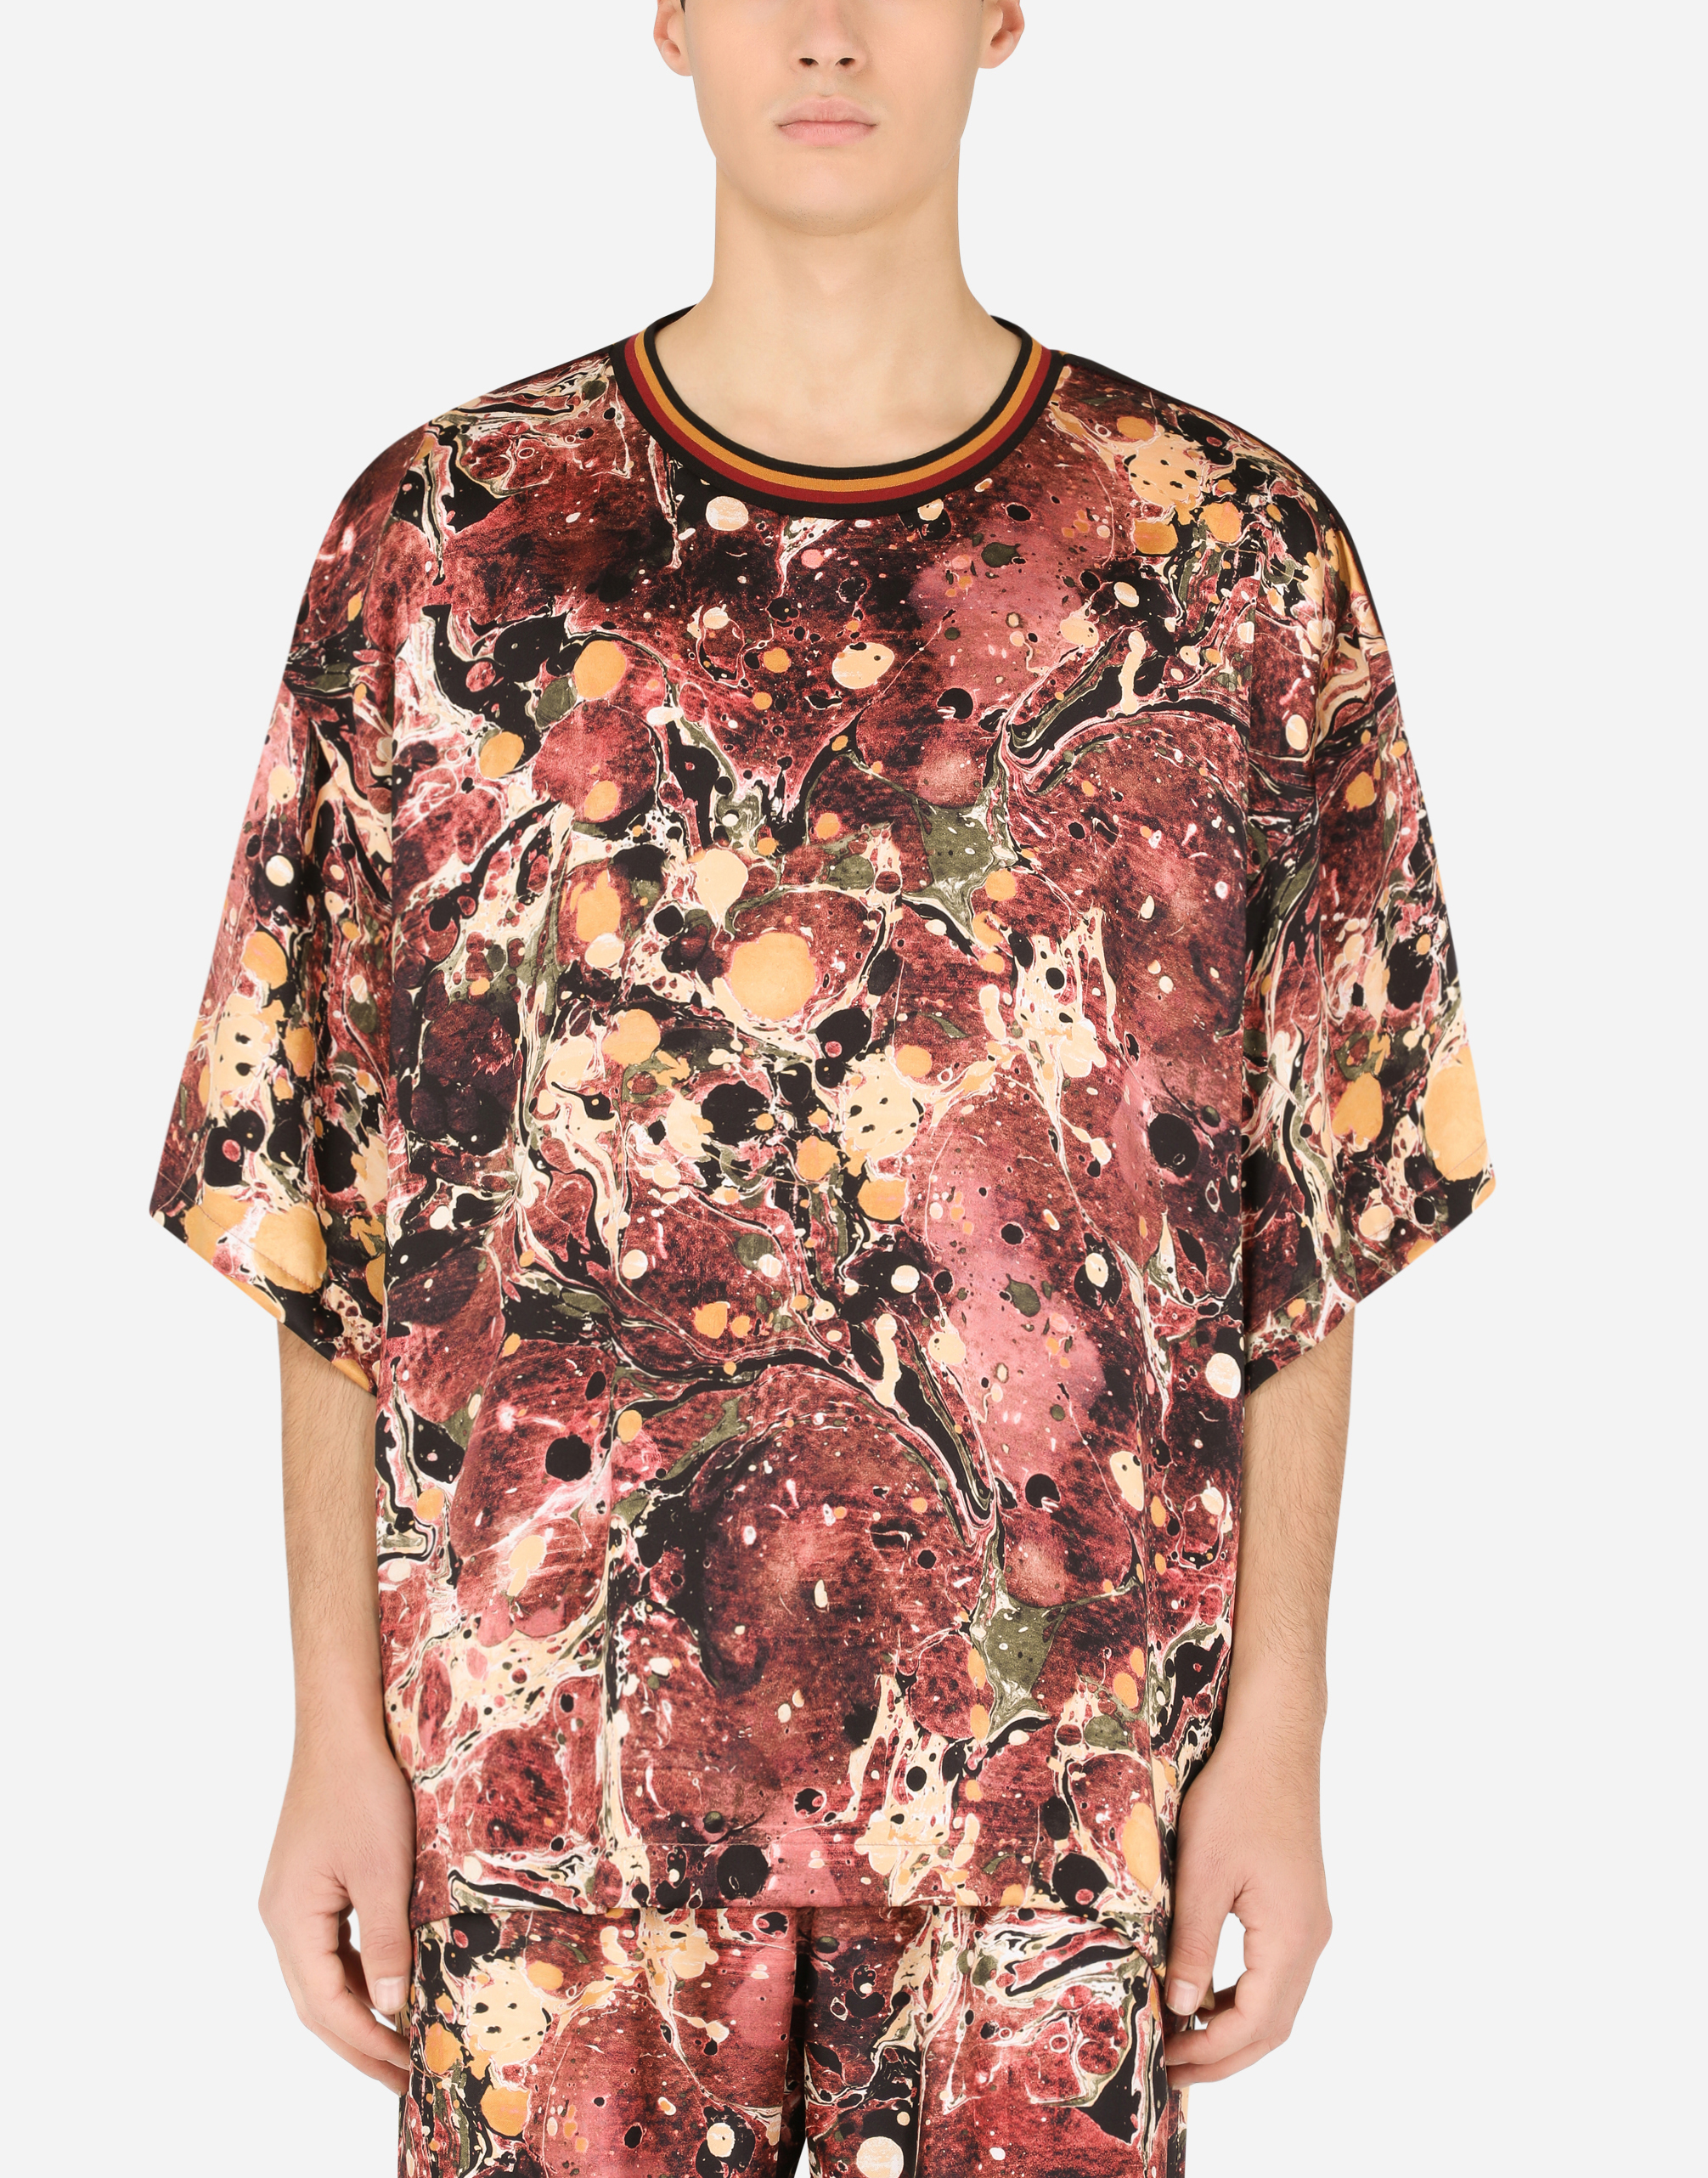 DOLCE & GABBANA TECHNICAL JERSEY T-SHIRT WITH MARBLED PRINT